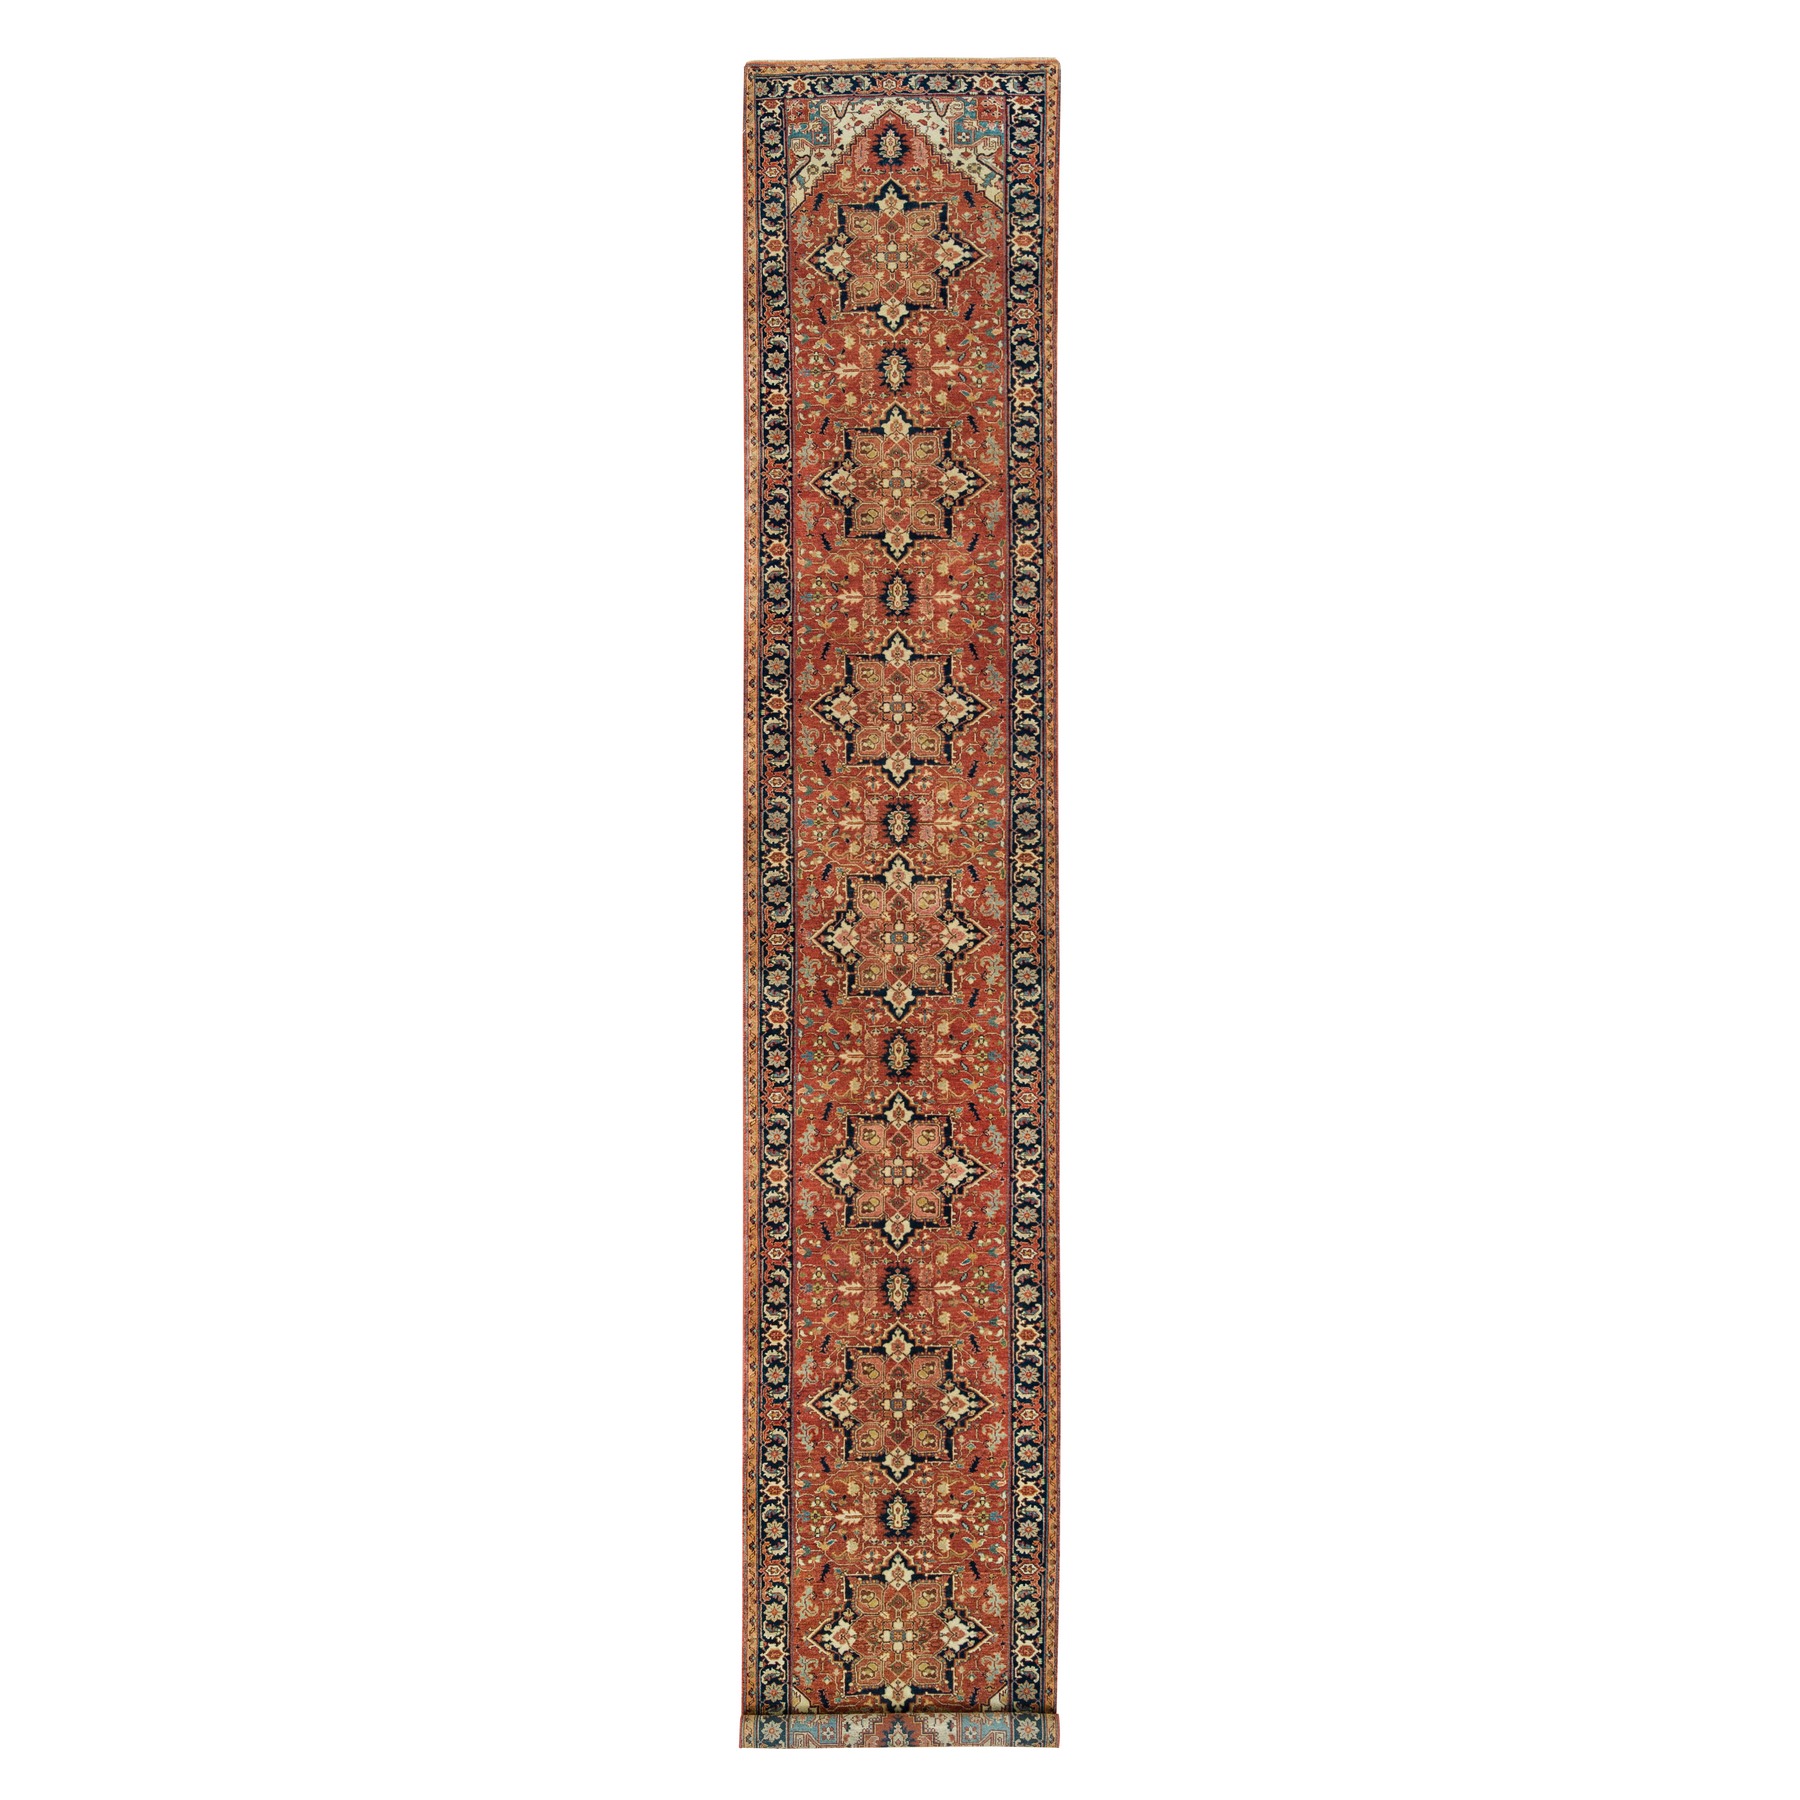 2'7"x16'2" Terracotta Red, Hand Woven, Antiqued Fine Heriz Re-Creation, Natural Wool, Natural Dyes, Dense Weave, XL Runner Oriental Rug 